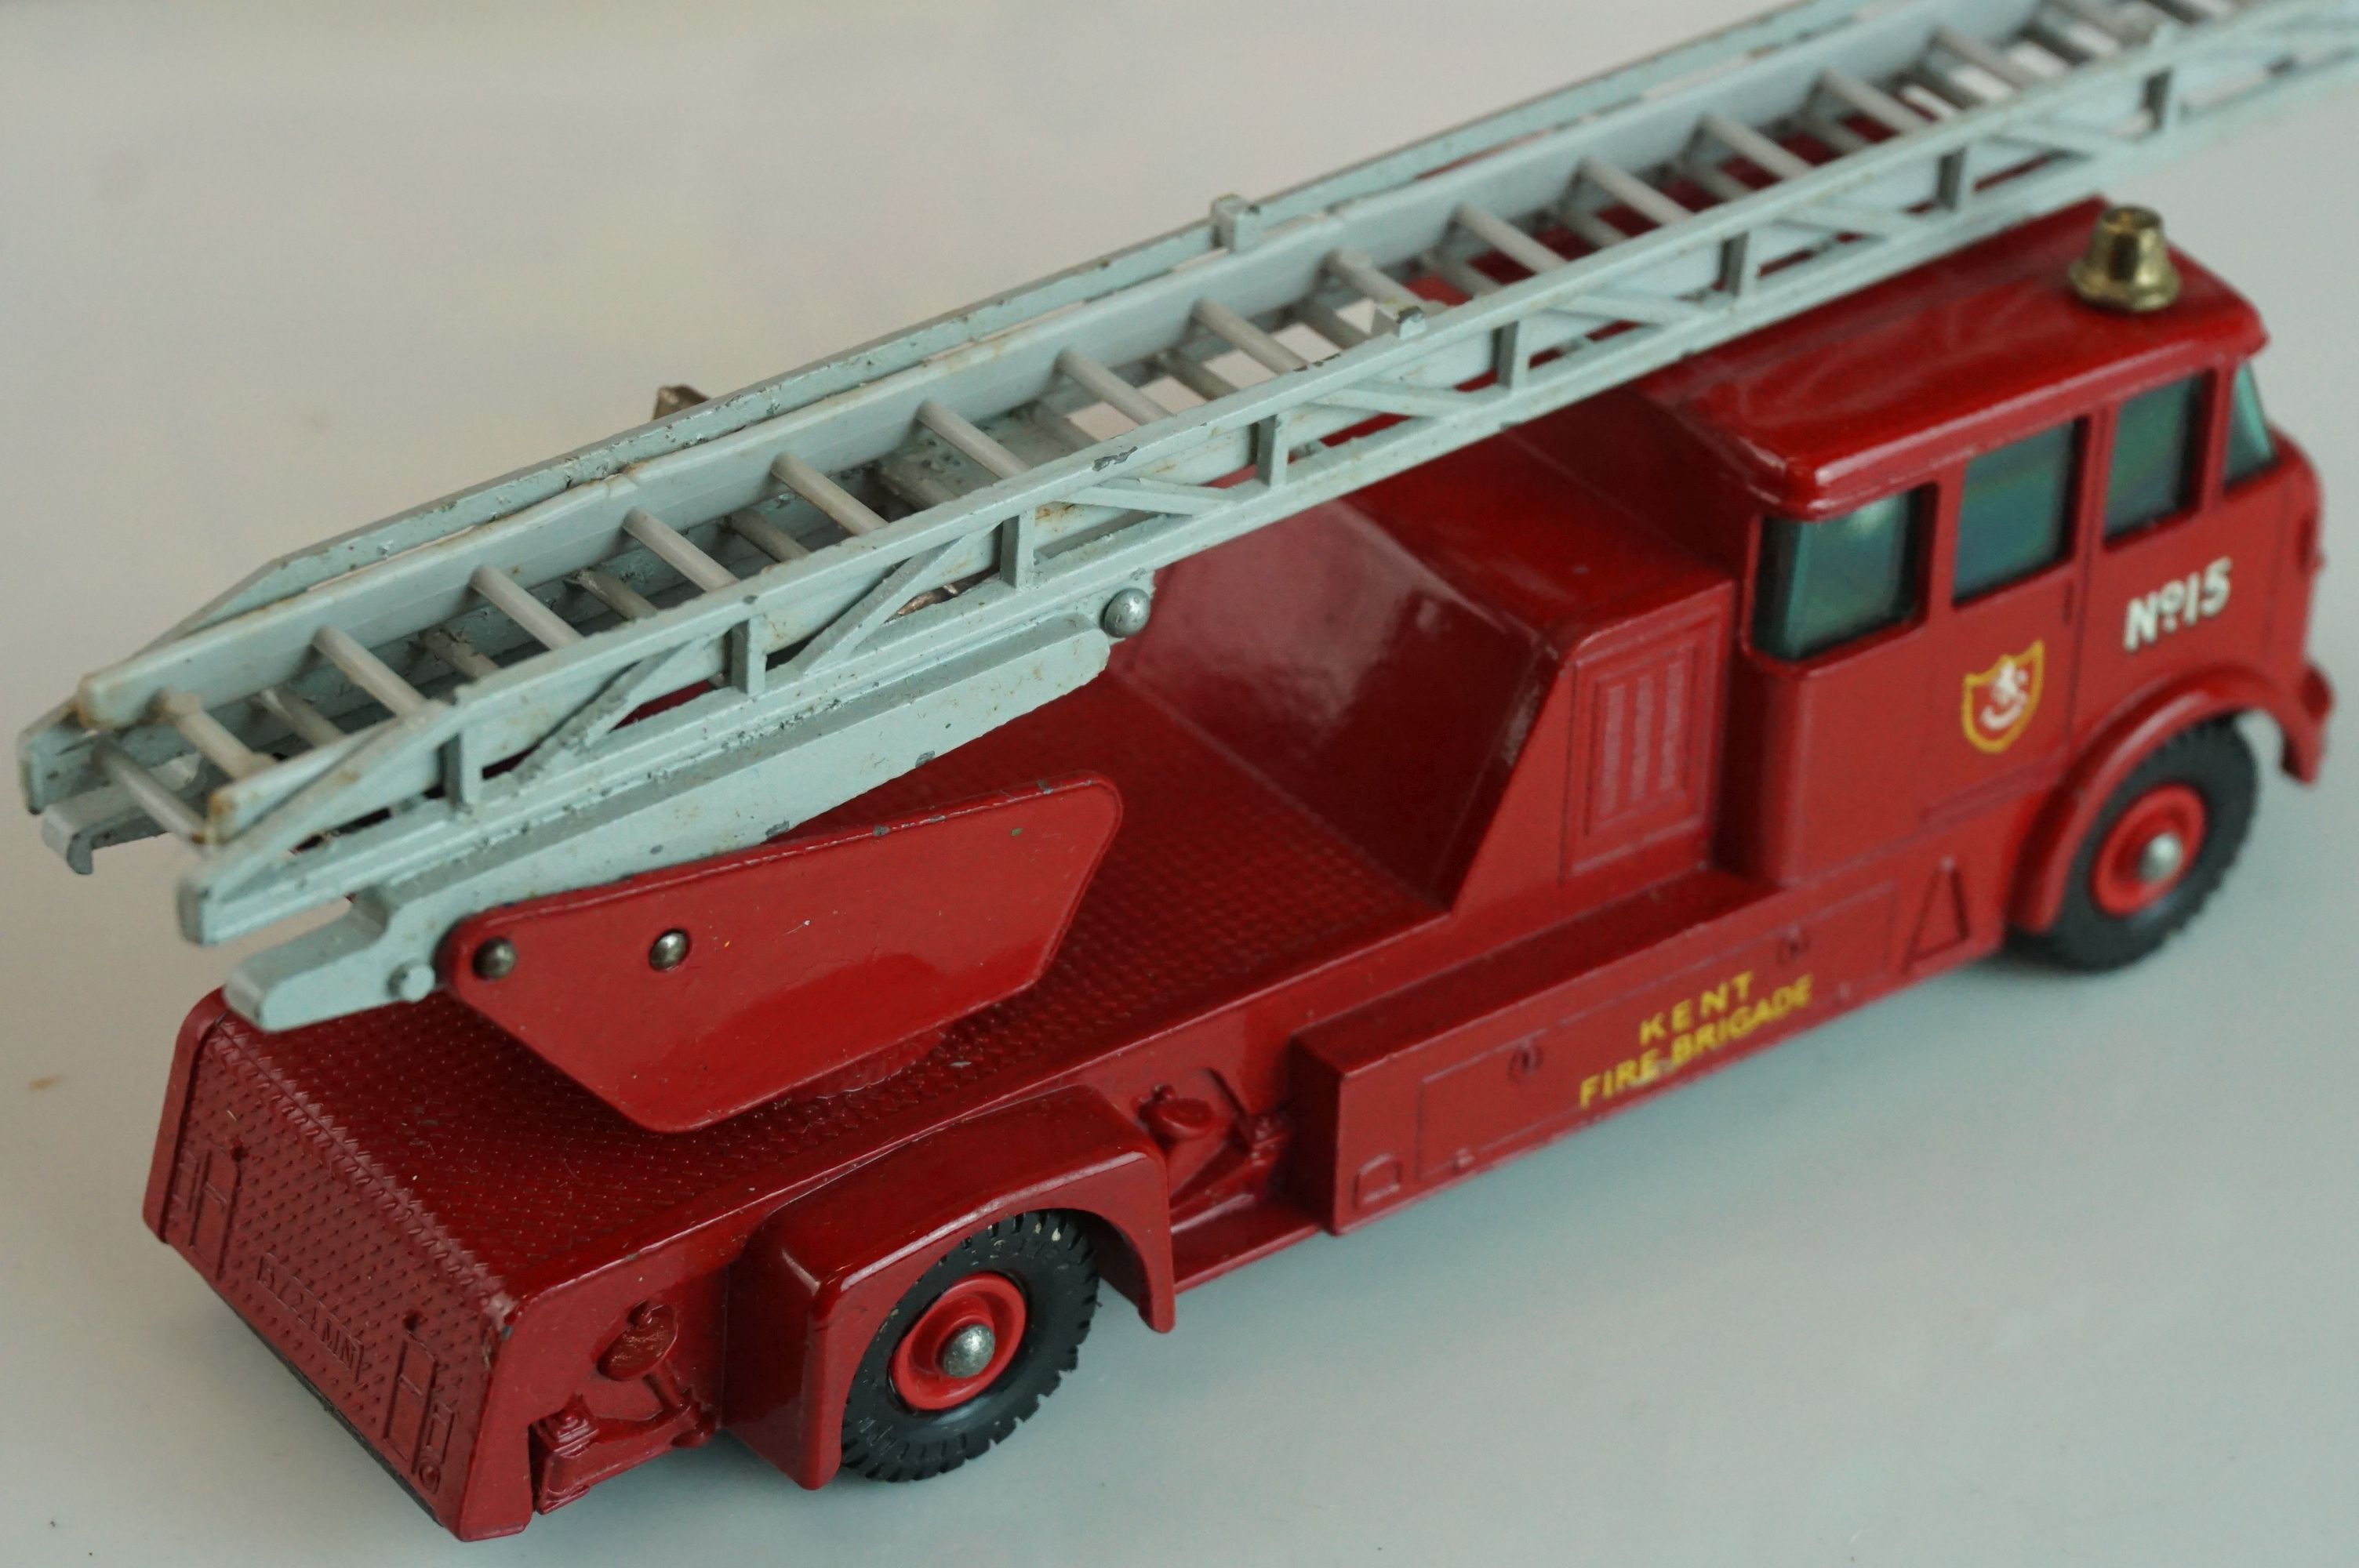 Boxed Matchbox K15 King Size Merryweather Fire Engine diecast model in vg condition with minimal - Image 5 of 8